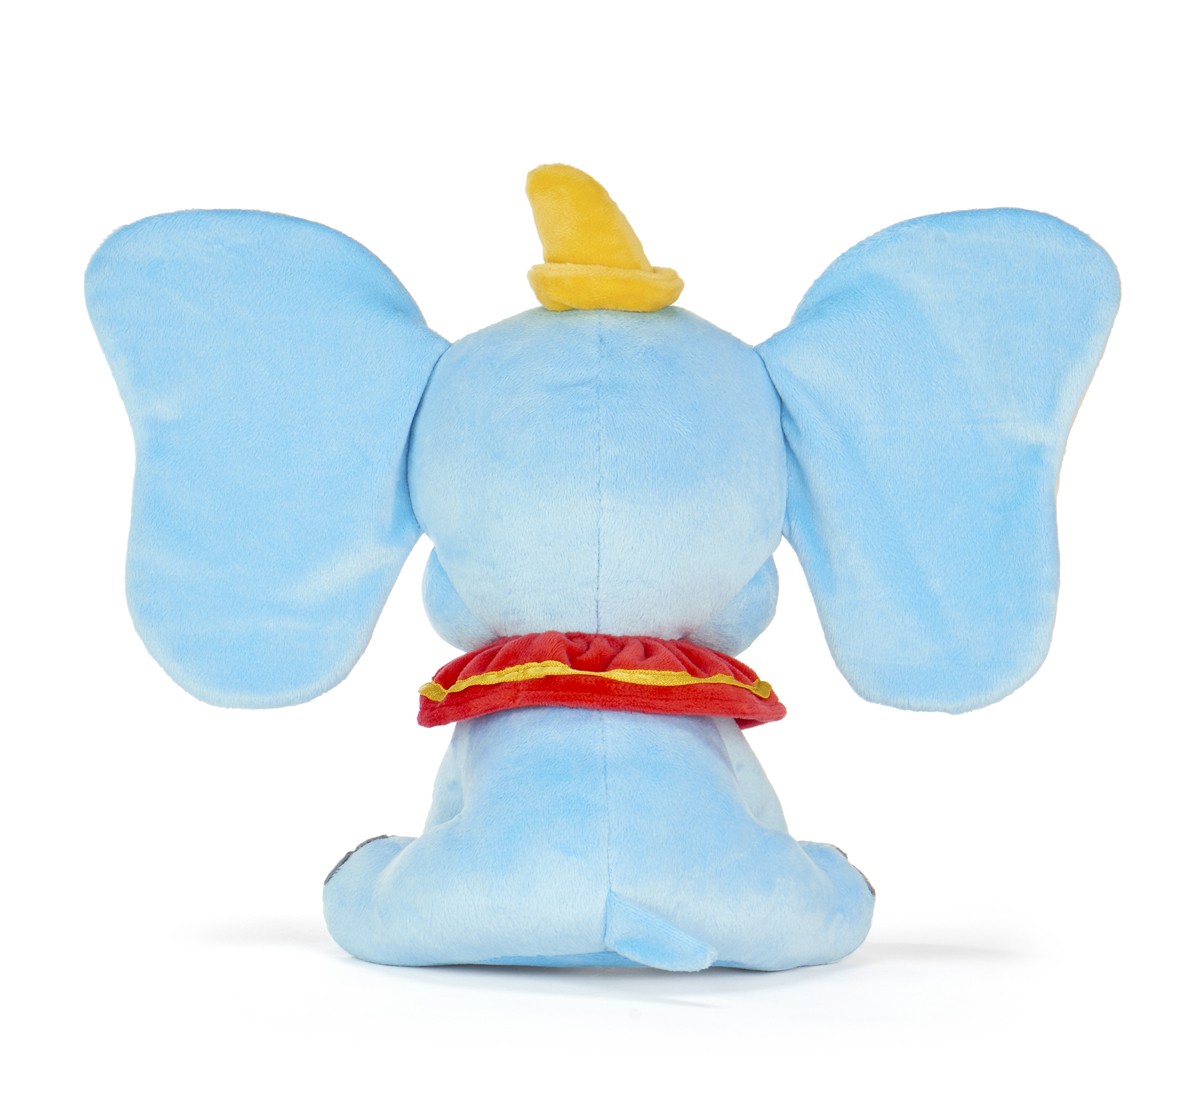 Disney Classic Dumbo 9 Inch Soft Toy for Kids, Multicolor 2Y+